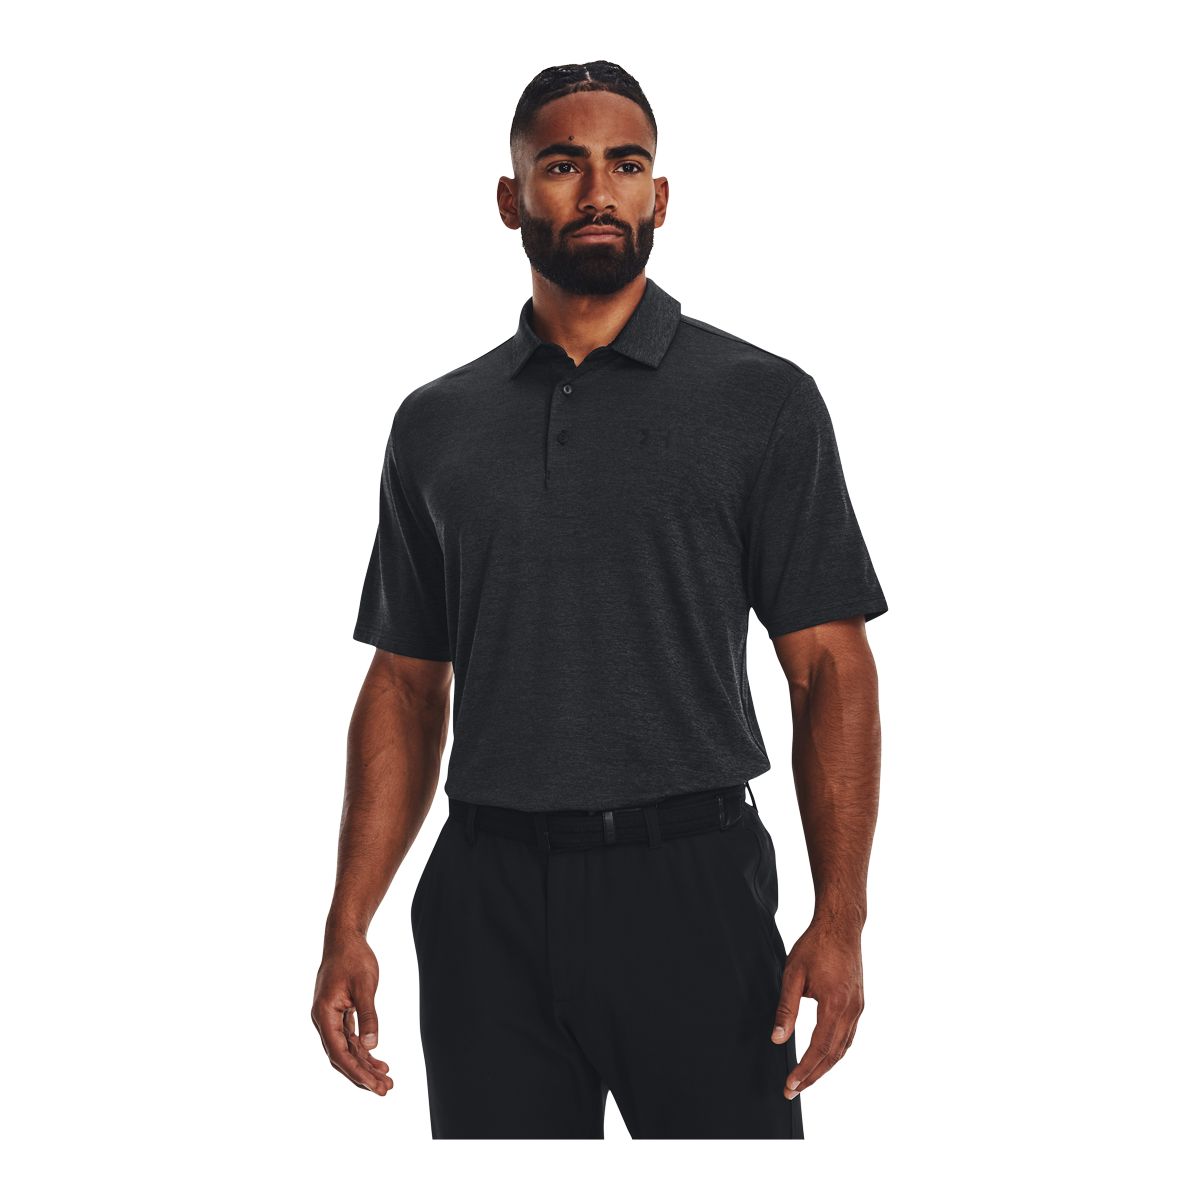 Under Armour Men's Playoff 3.0 Polo T Shirt